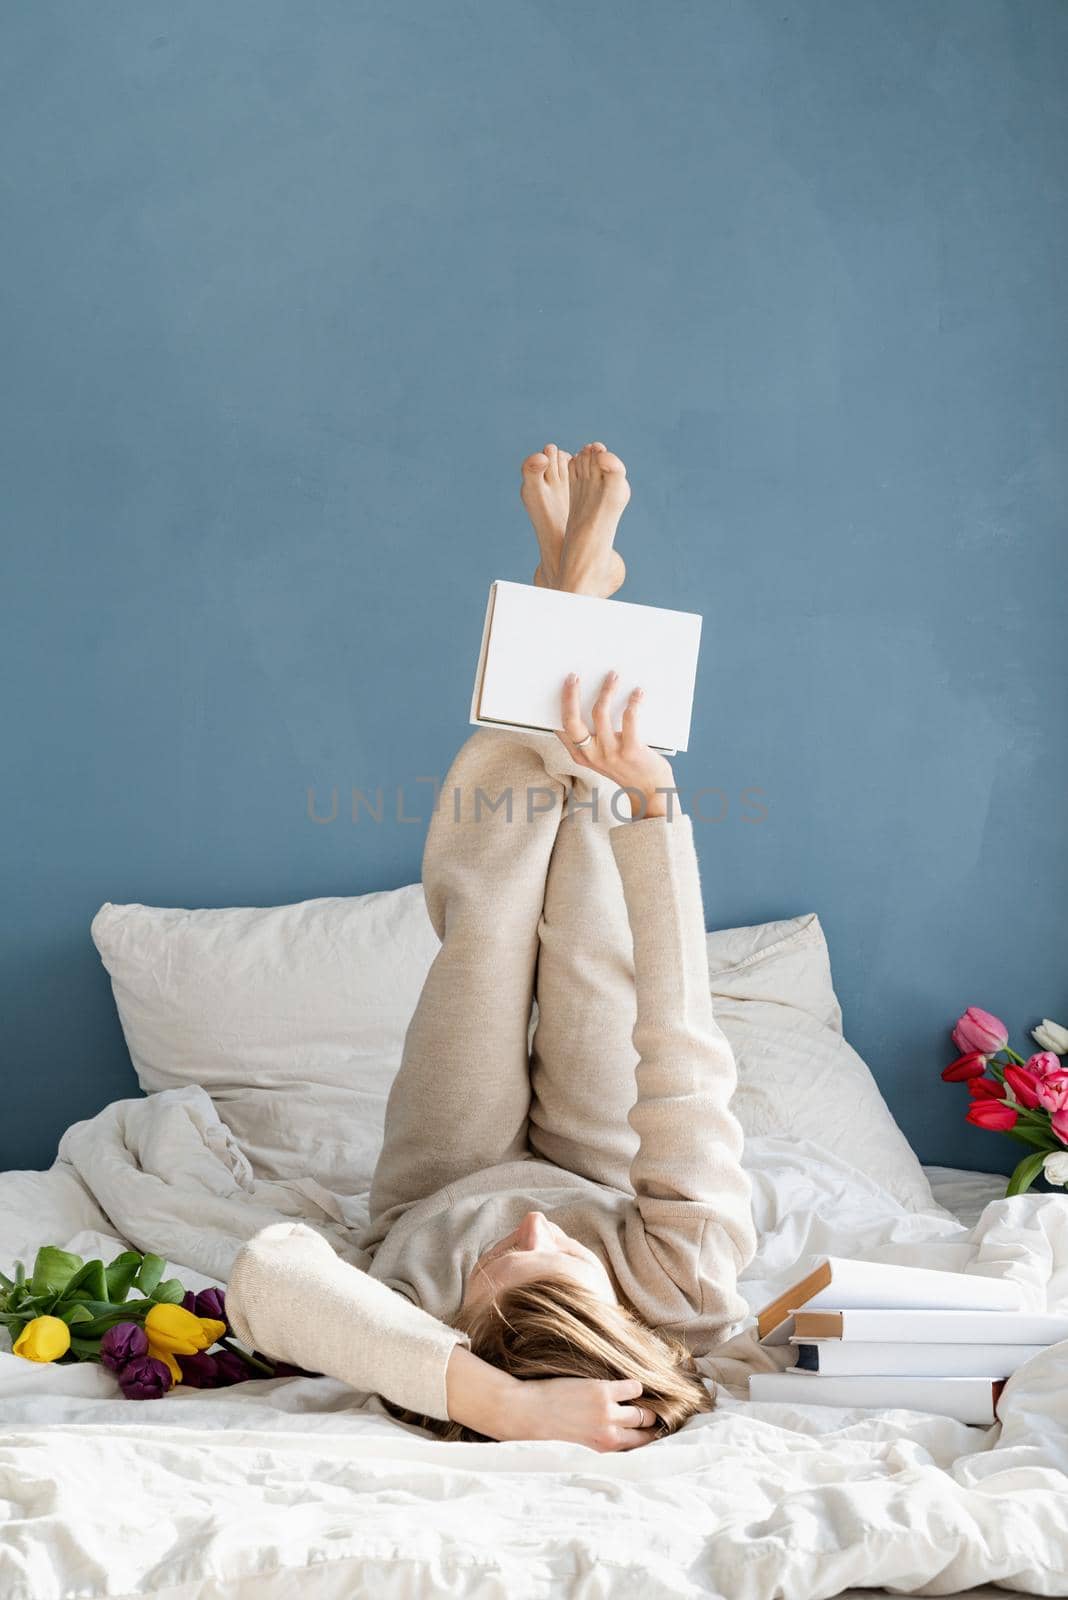 Happy smiling woman lying on the bed wearing pajamas, with pleasure enjoying flowers and reading a book